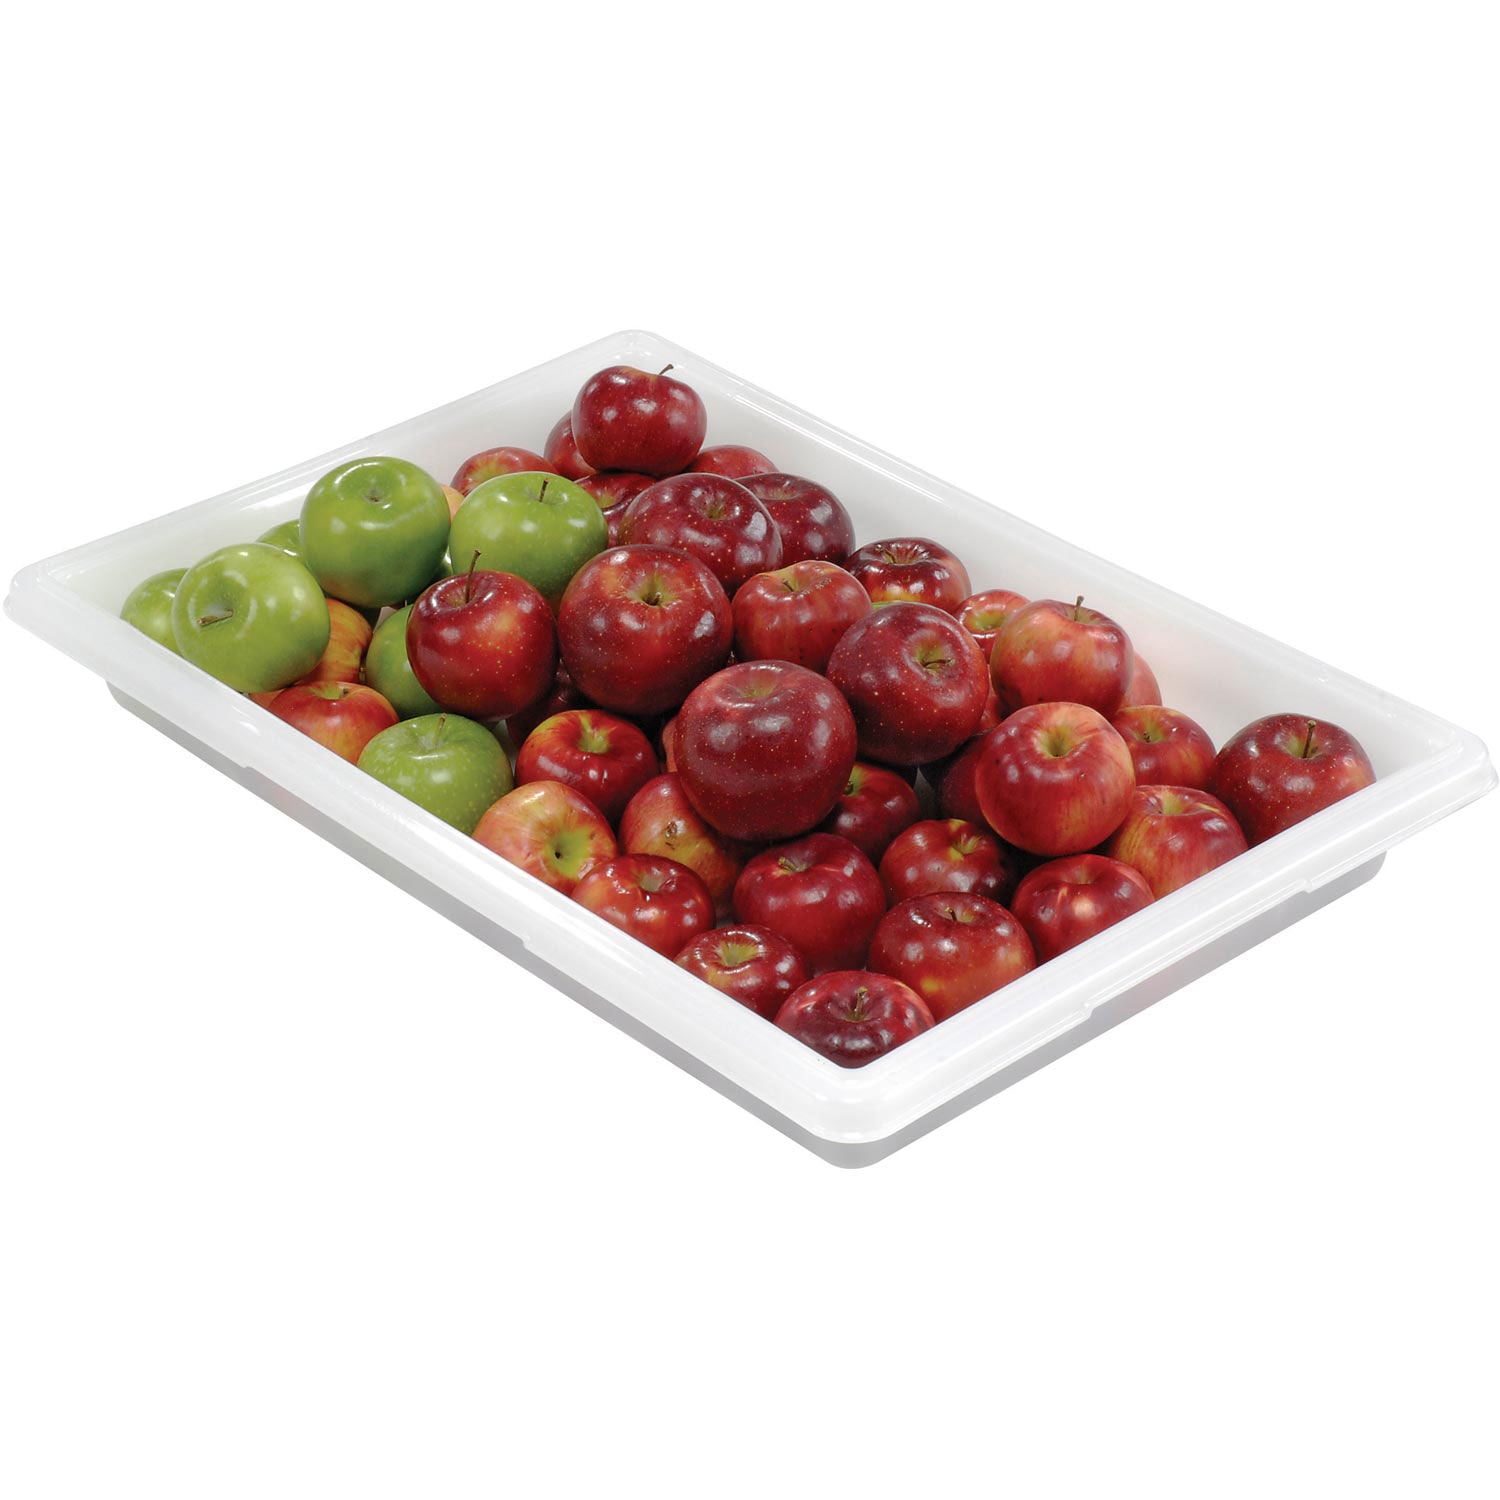 Rubbermaid Commercial Products Food Tote/Box, 5-Gallon, White,  Freezer/Dishwasher Safe, Food Storage/Organization for  Fruits/Vegetables/Grains in